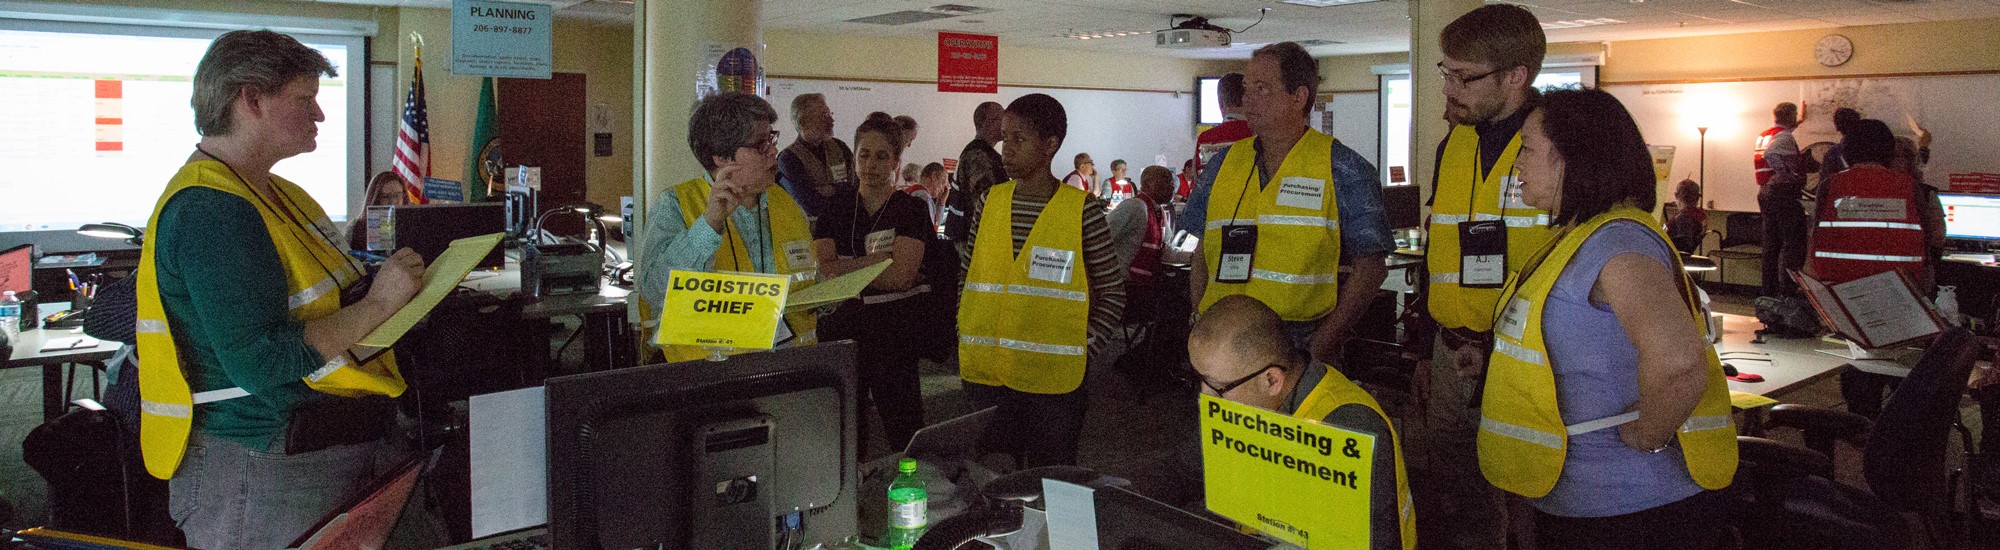 A team of logistics coordinators meet to discuss how to respond to an emergency scenario.